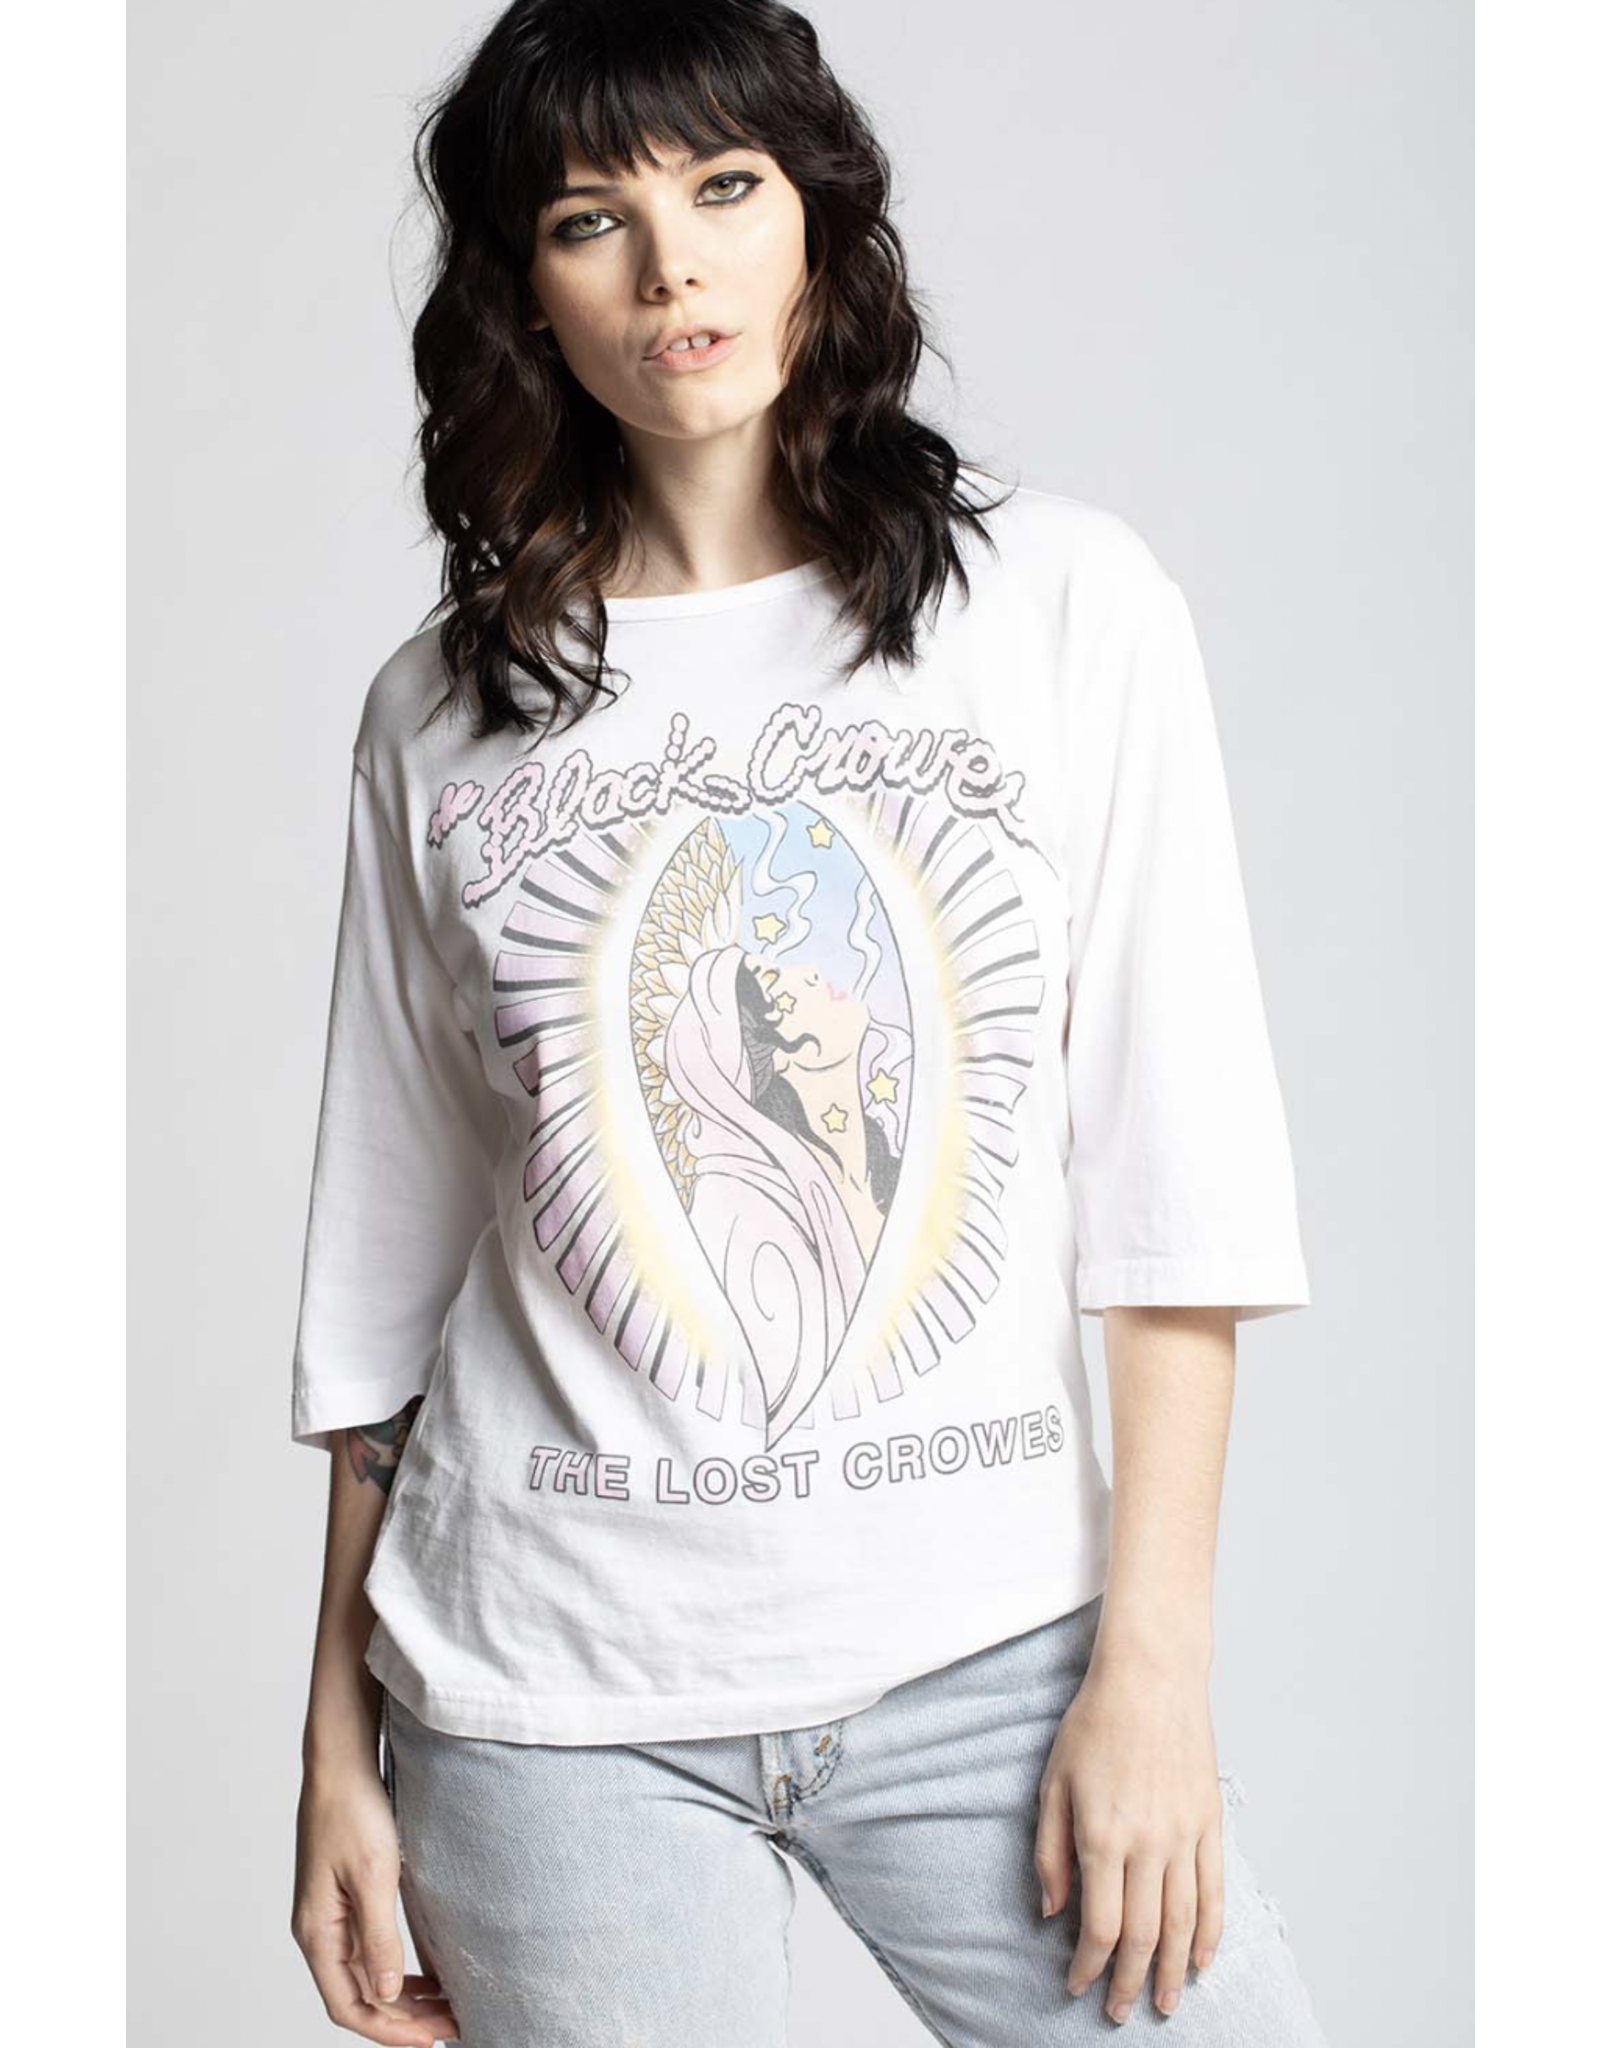 Recycled Karma Recycled Karma - The Black Crowes The Lost Crowes Tee